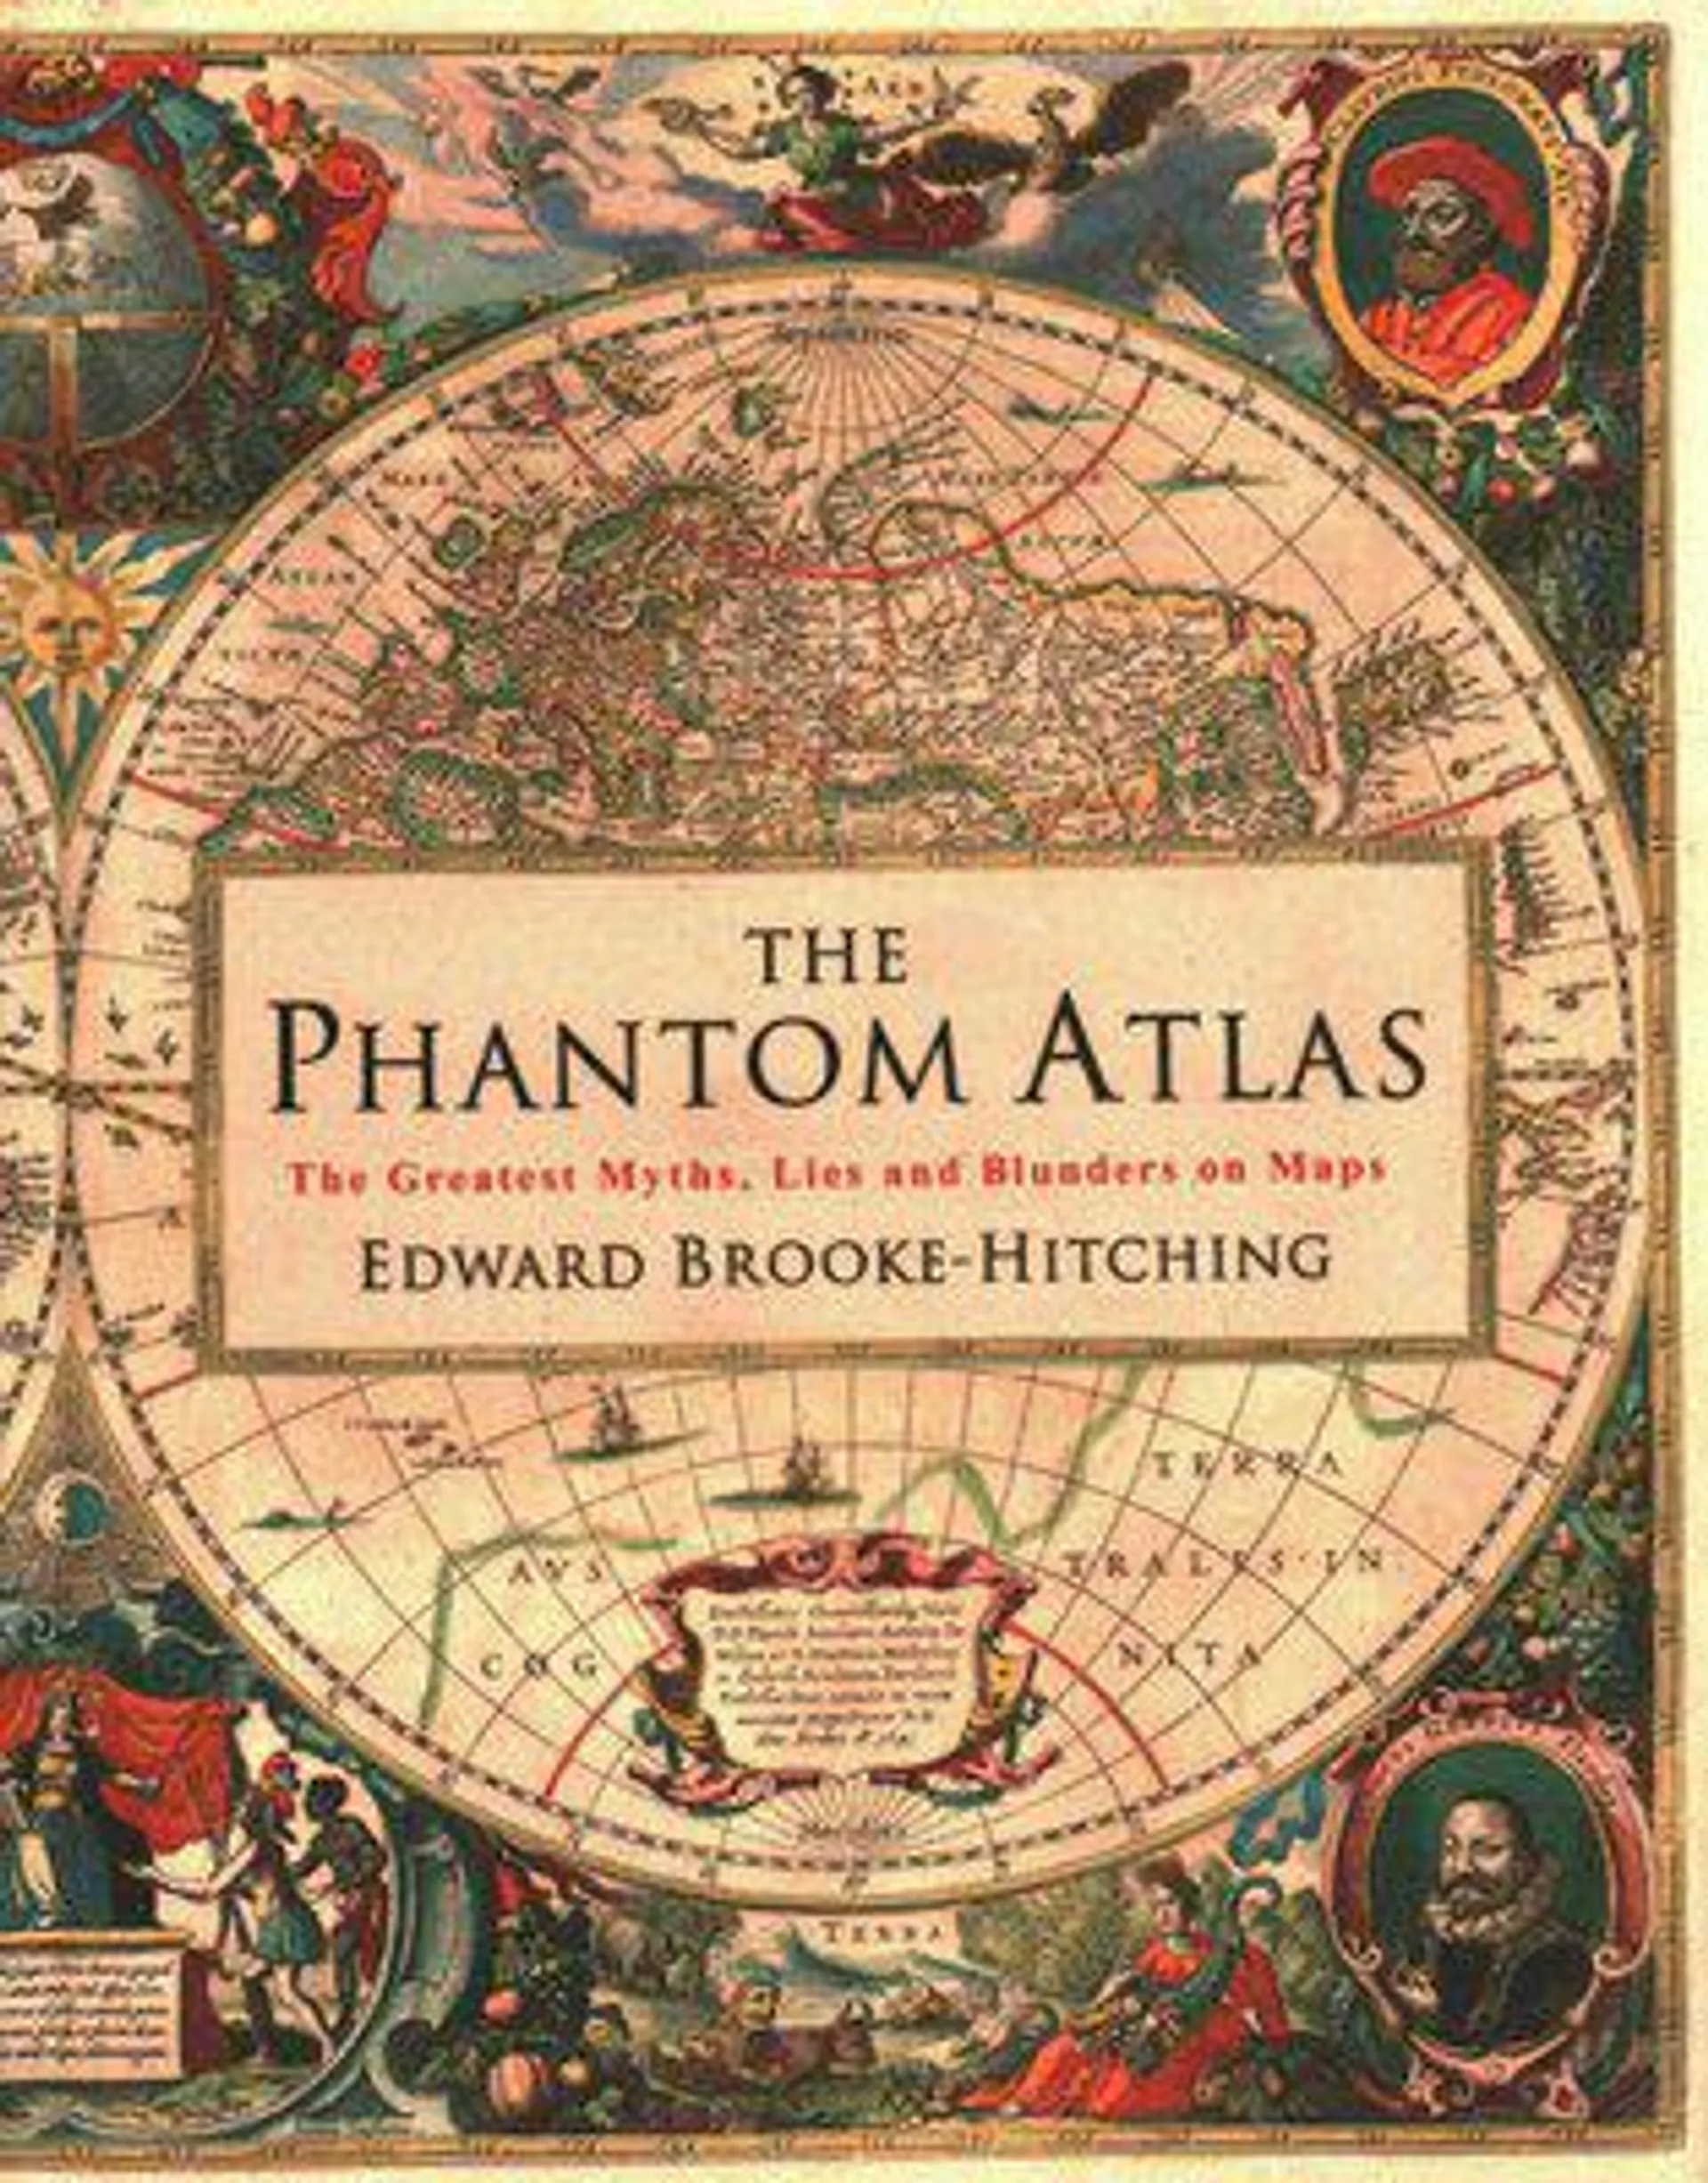 : The Greatest Myths, Lies and Blunders on Maps